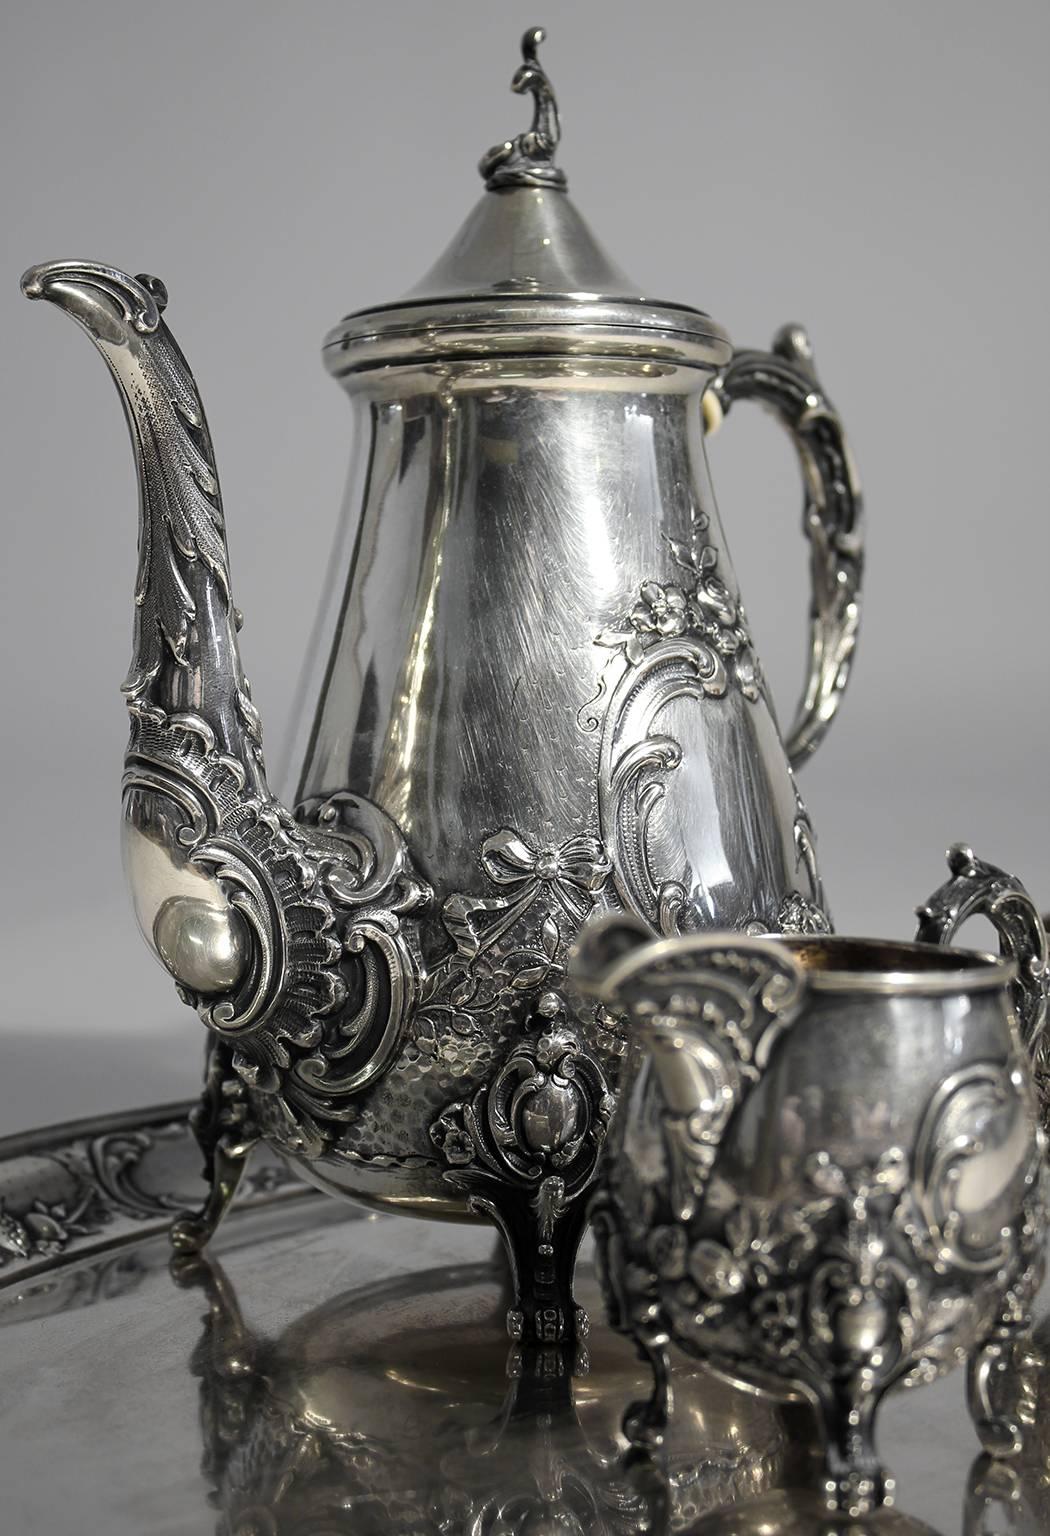 German Antique Baroque H. Meyen & Co. of Berlin 800 Silver Tea Set with Tray For Sale